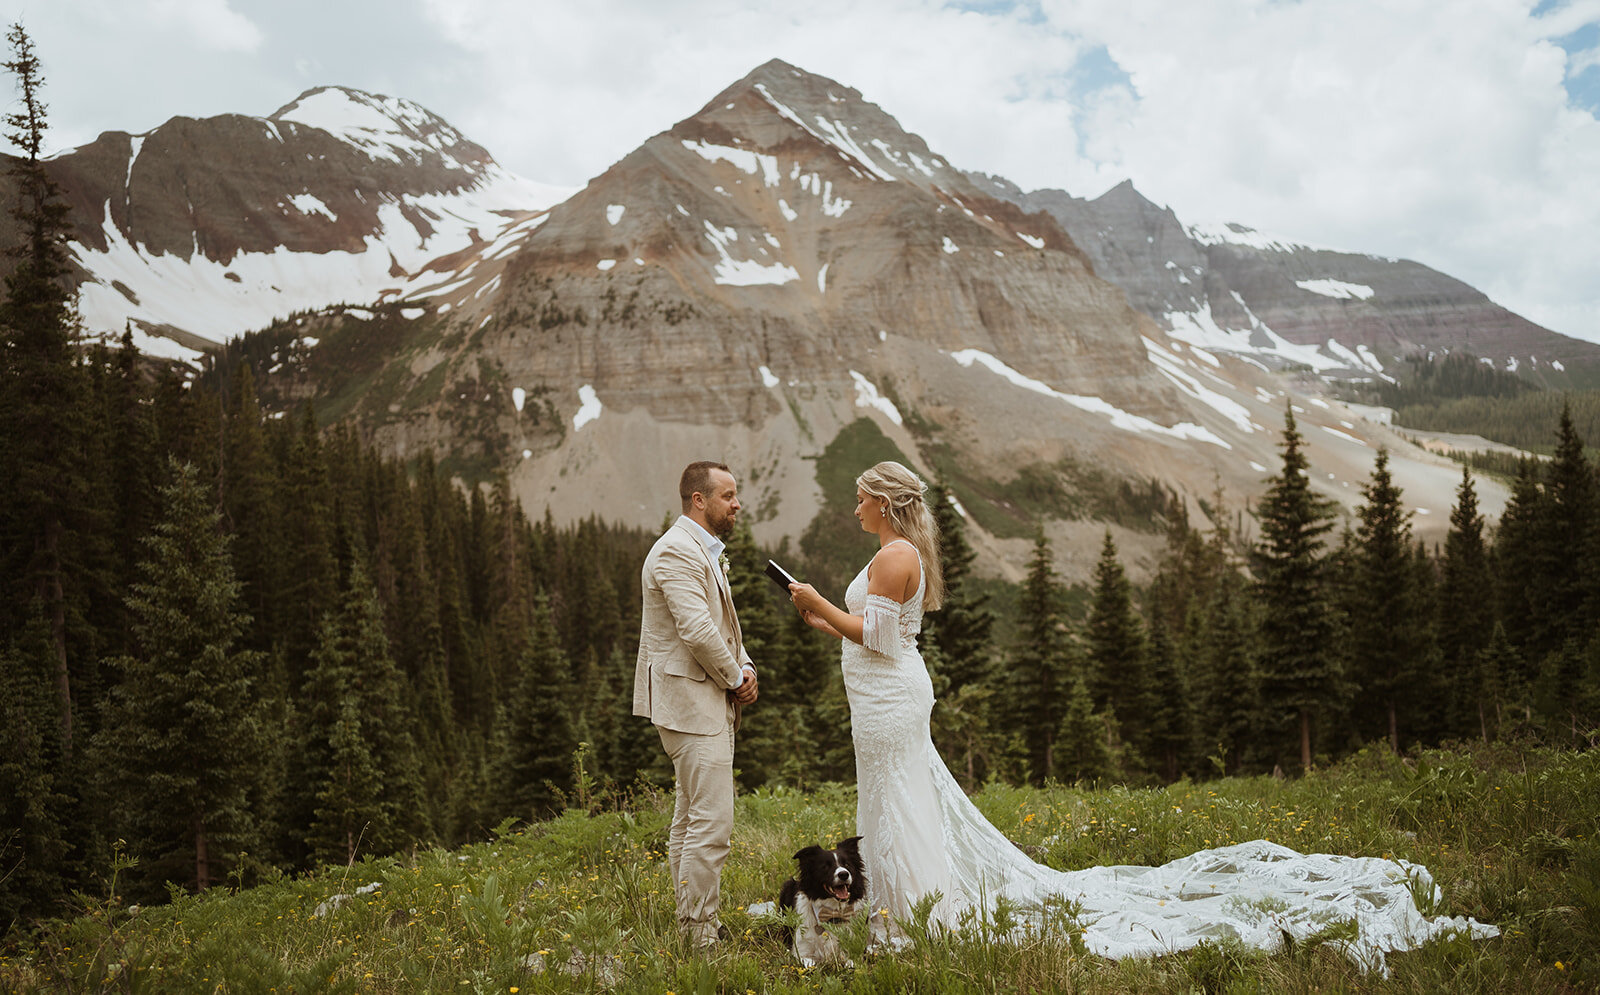 The couple is facing each other with their dog in between them as they read their vows in a valley. It is summertime and very warm. The bride is wearing a dress with patterned lace, and the groom is wearing a tan suit. They are wiping away tears as they finish their elopement. The couple decided to elope in Colorado, and they hiked and off roaded on their elopement day. They included their dog in their elopement, which is a border Collie. The mountains are directly behind them and are framing them in this image. there is still snow on them, and there are wildflowers. If you want to find wildflowers on your elopement, plan to elope in the early summer.